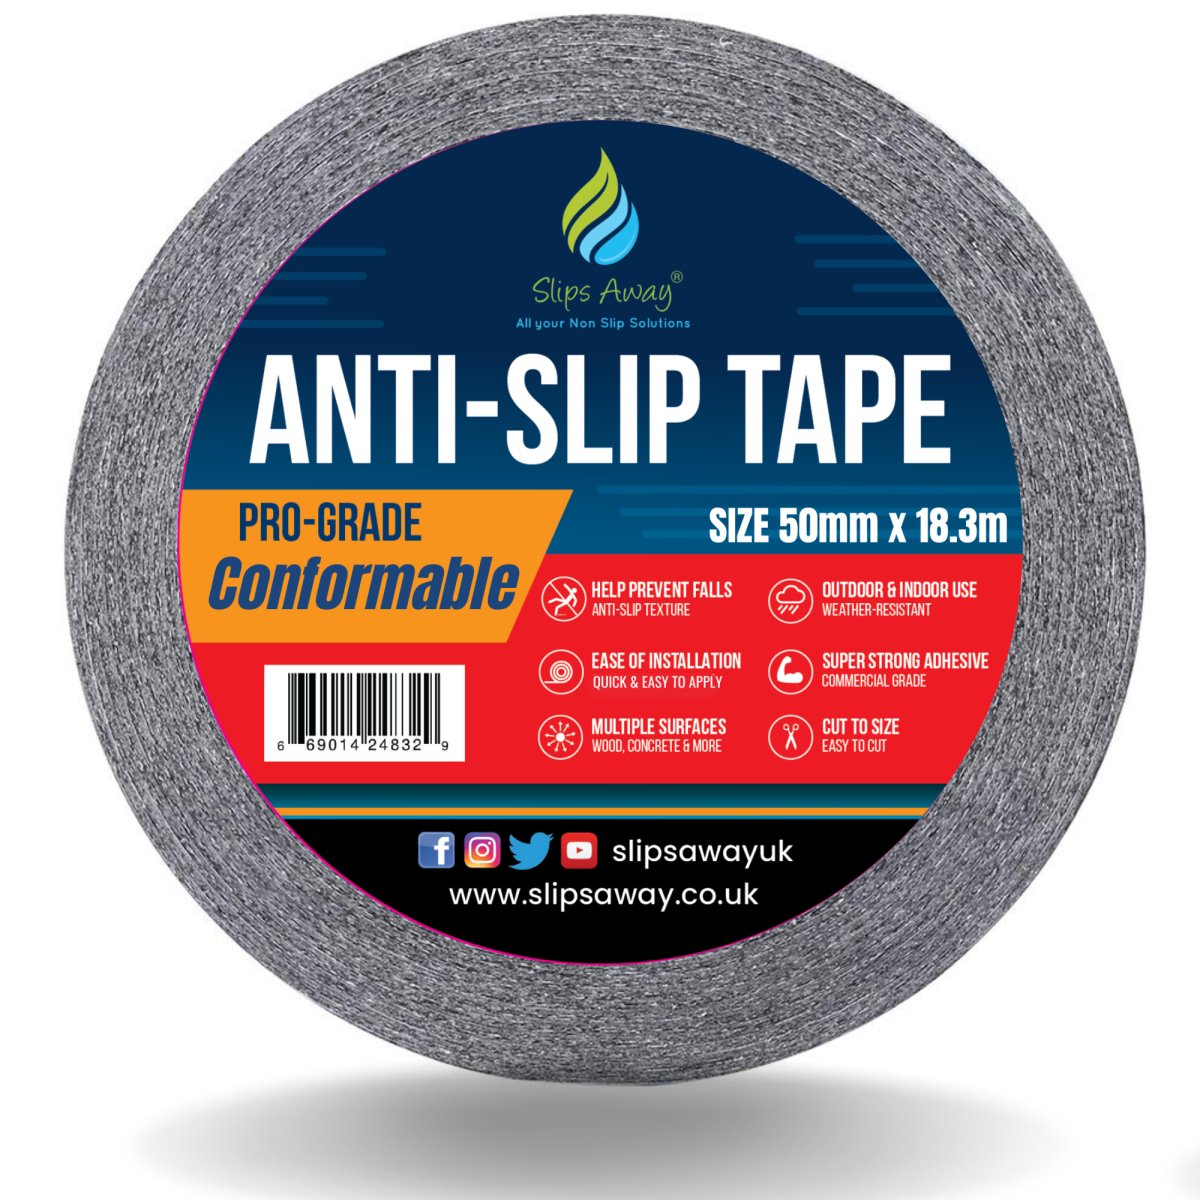 Conformable Non Slip Tape - Aluminium Foil Backing for Irregular Surfaces - Slips Away - Conformable Anti-Slip Tape - H3406N-Conformable-Safety-Grip-Black-50mm-2-1 -